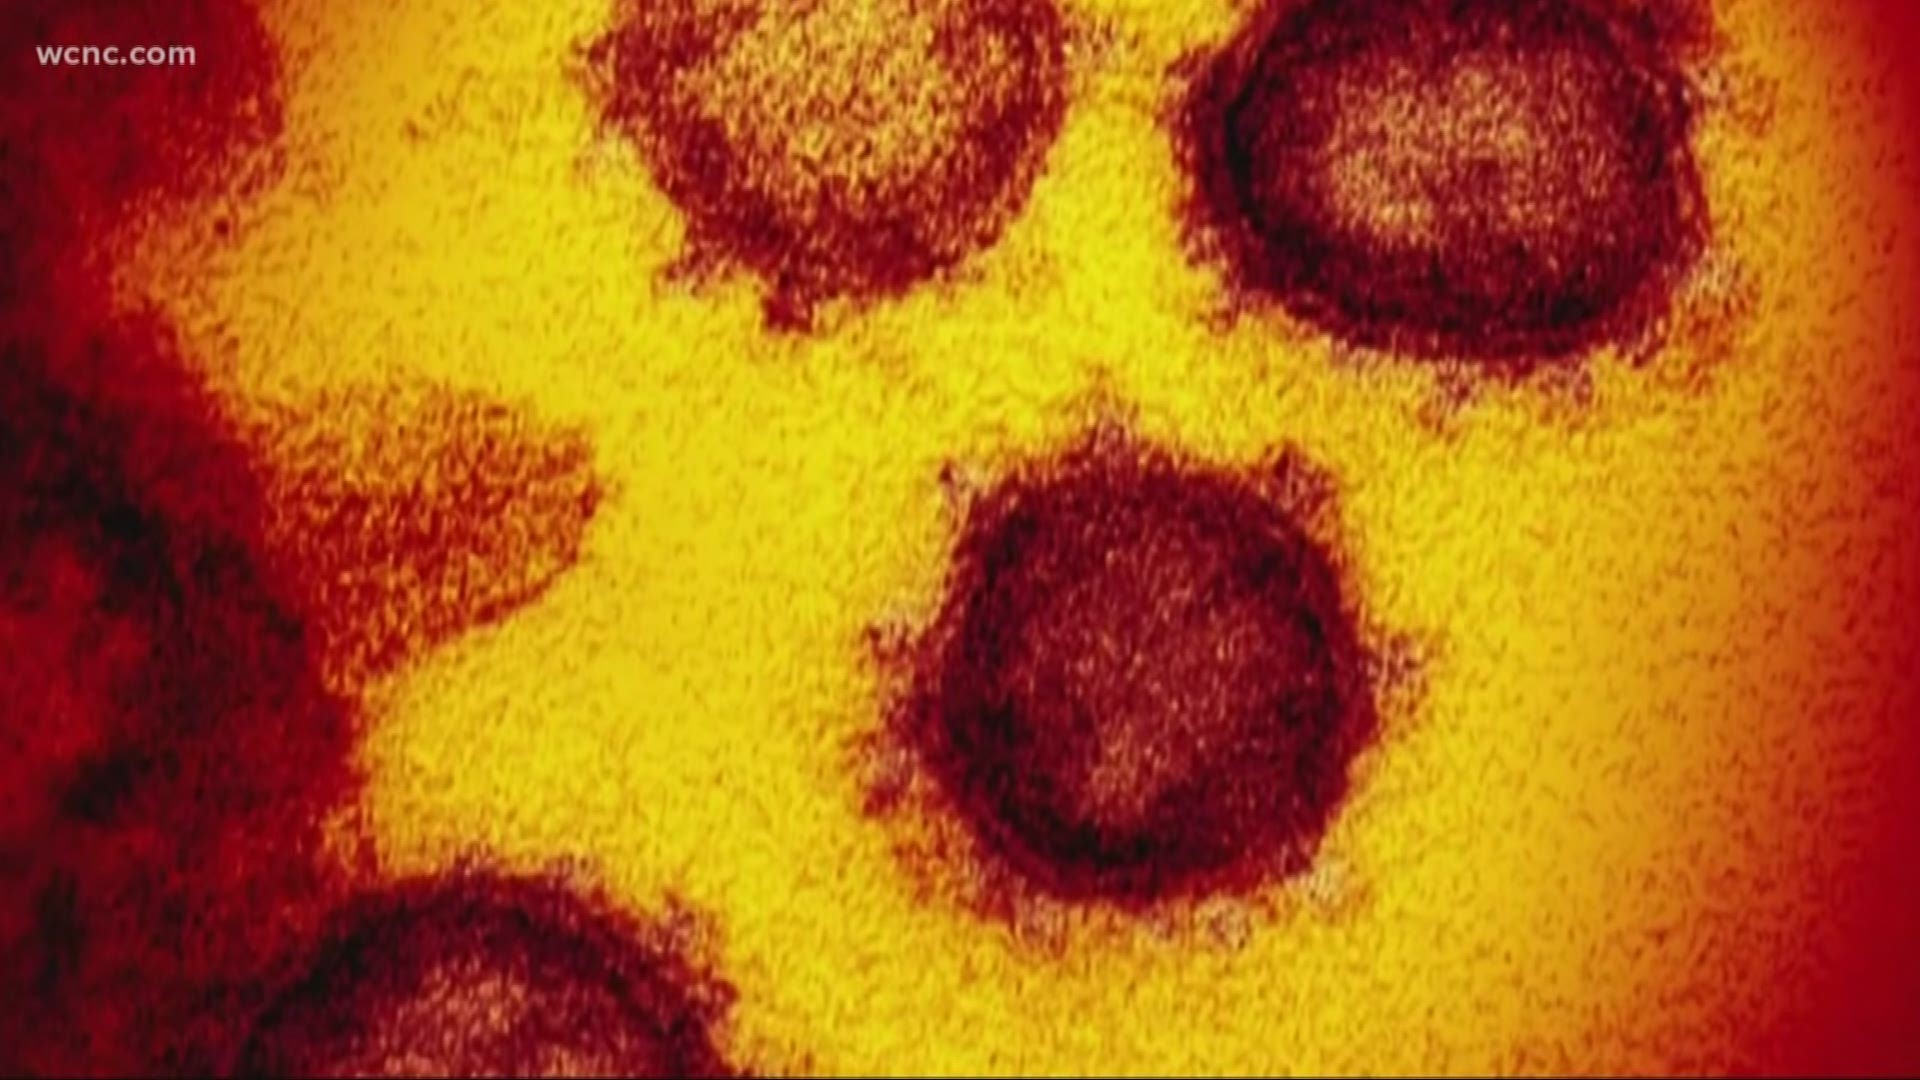 North Carolina has its first presumptive case of coronavirus, Governor Roy Cooper announced Tuesday afternoon.